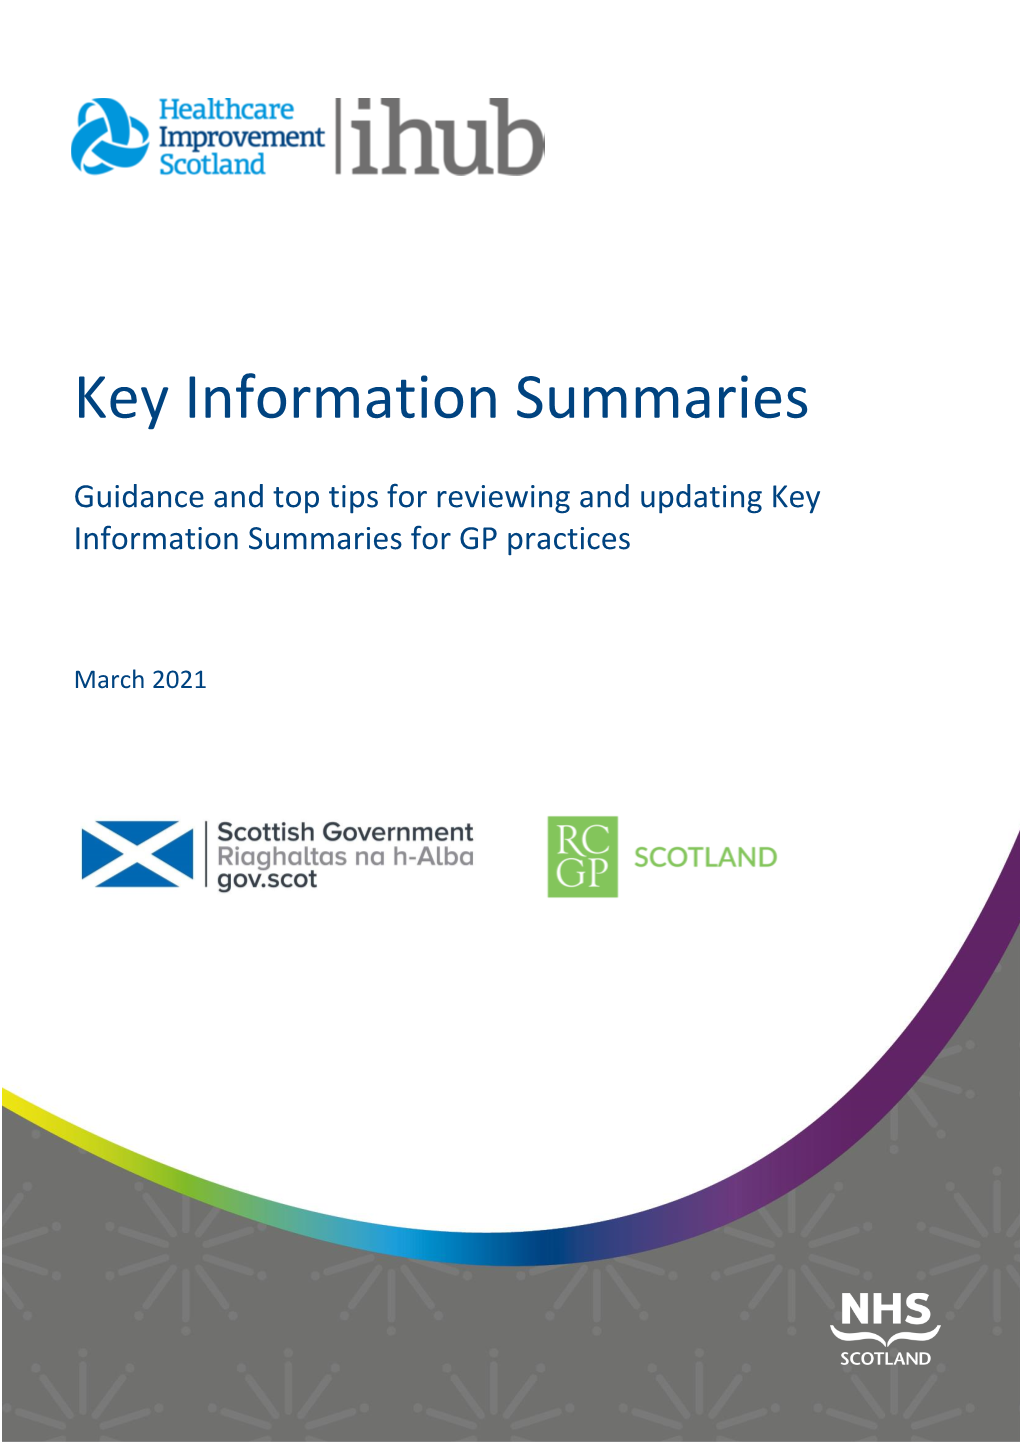 Guidance and Top Tips for Updating and Reviewing Key Information Summaries for GP Practices